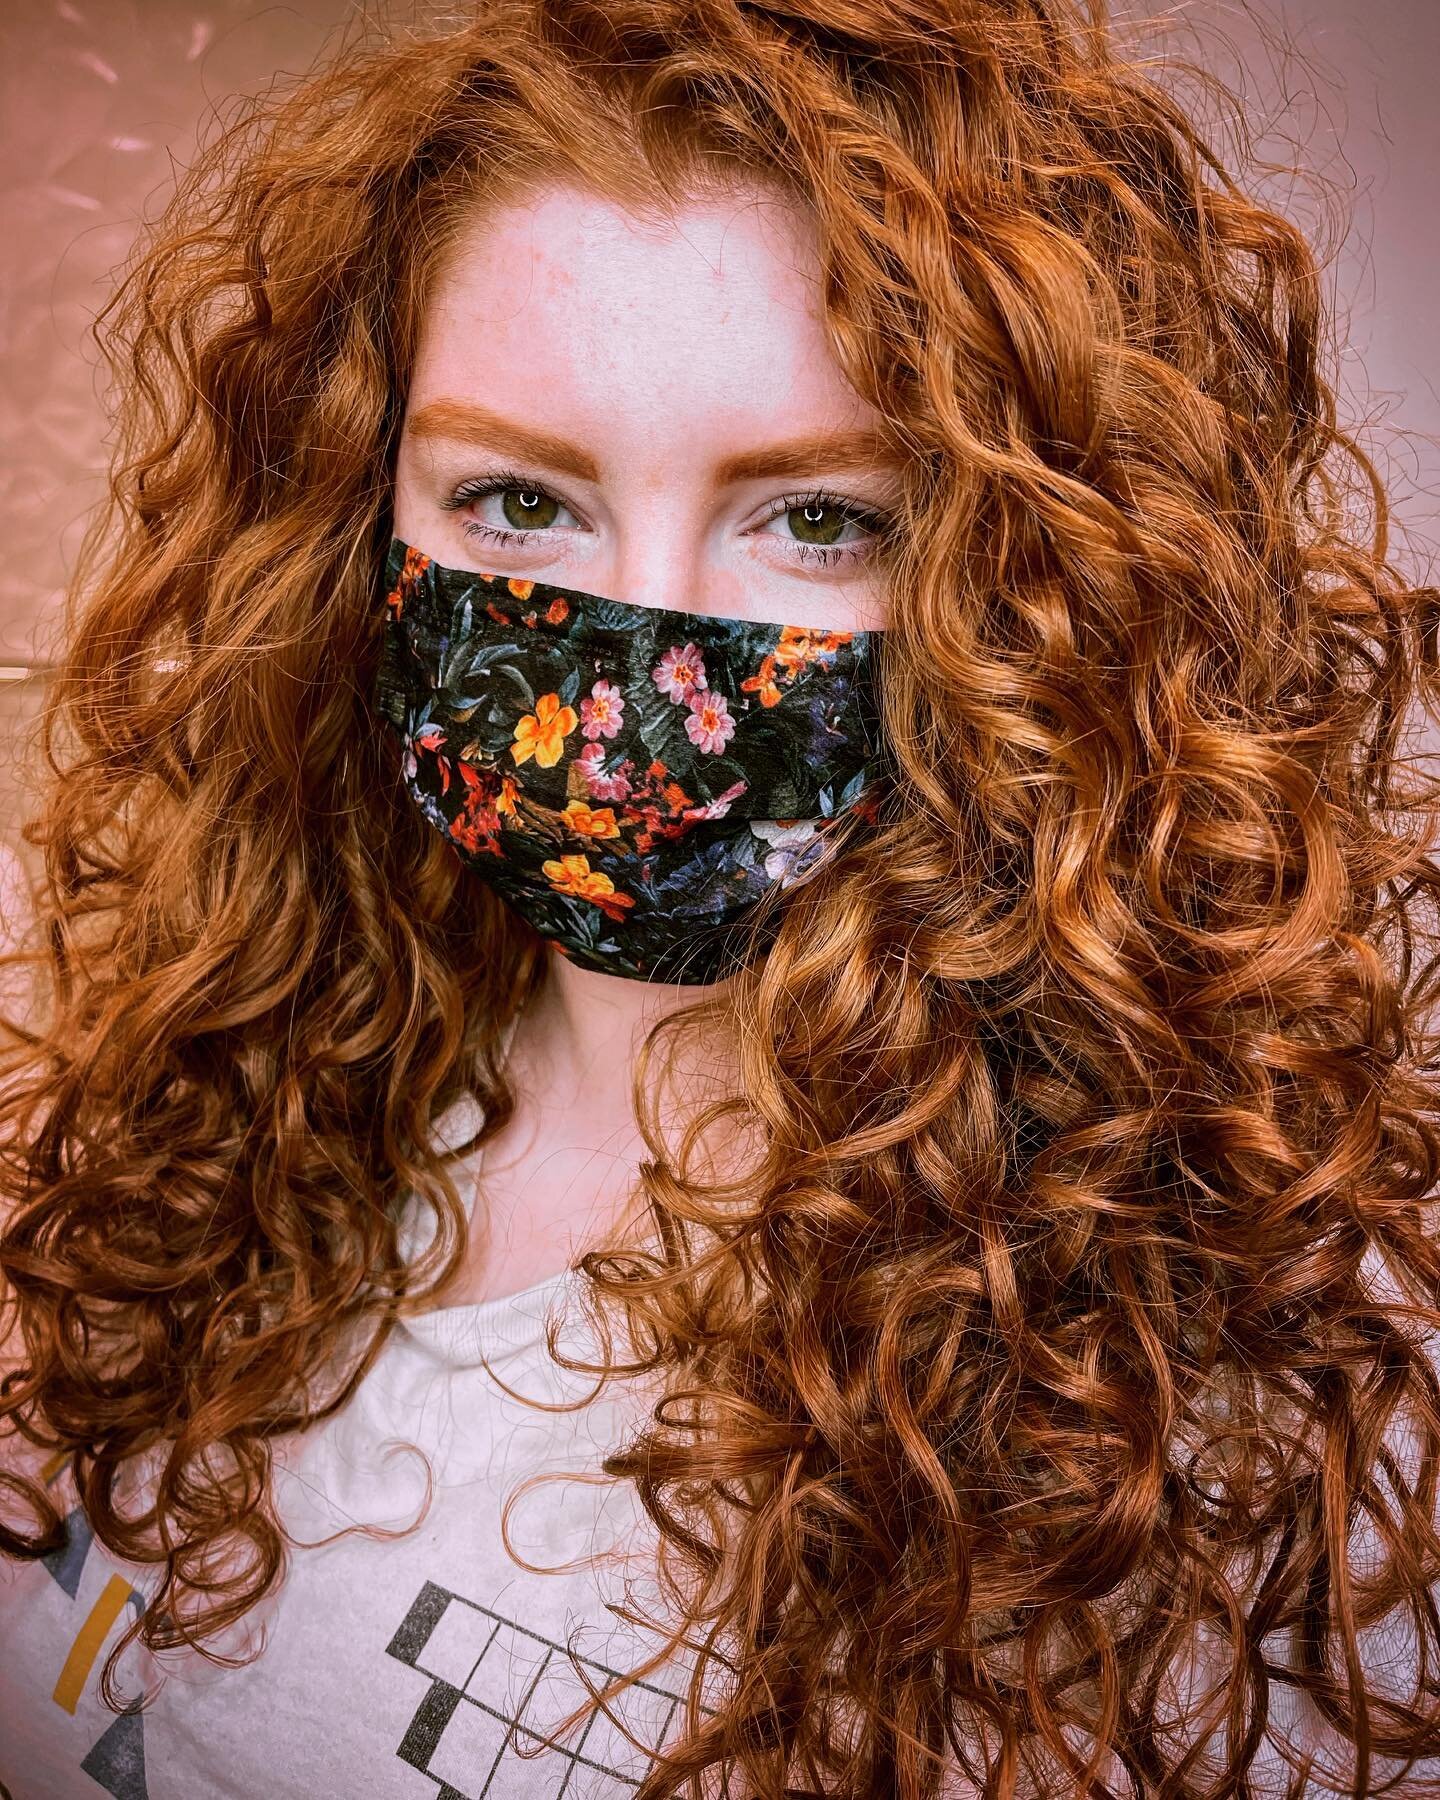 SPRING is in the AIR! Fiery Red  Shaggy curly head Brought to you, 

Red, orange,golden, Copper redheads on now.

Enjoying the Red, Copper, Orange Gold,  color and strawberry blonde Dimensional 🎨 painting highlights. 

She also got a Curly Textured 